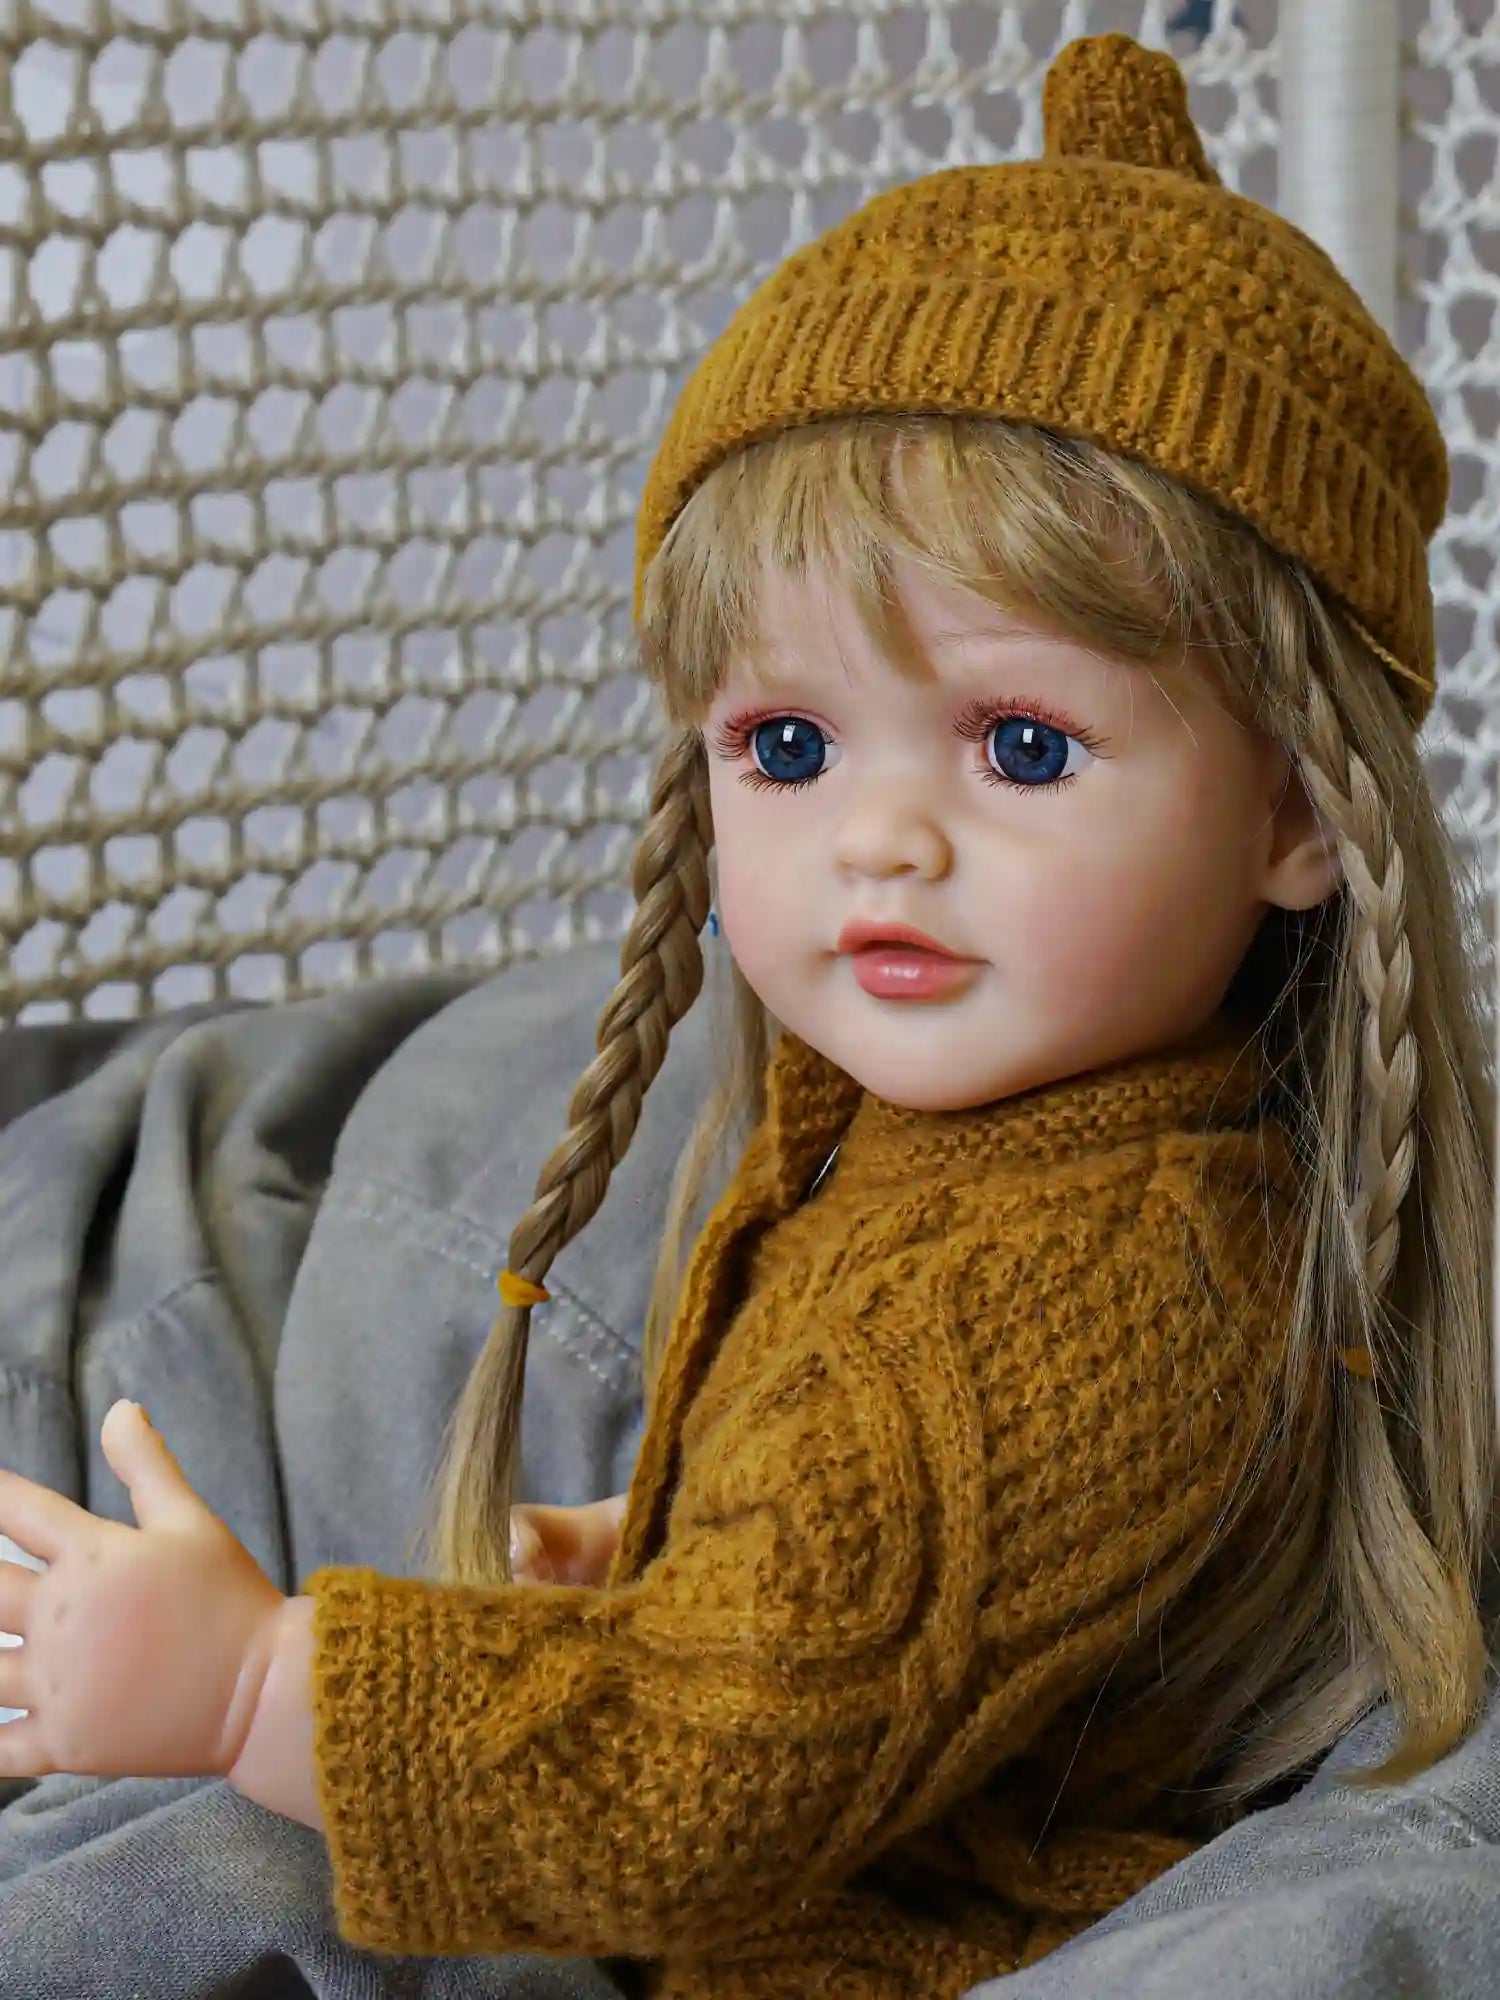 This reborn doll, with strands of gold in her hair and a tender expression, dressed in an olive-hued knit, is a heartwarming addition to any collection.